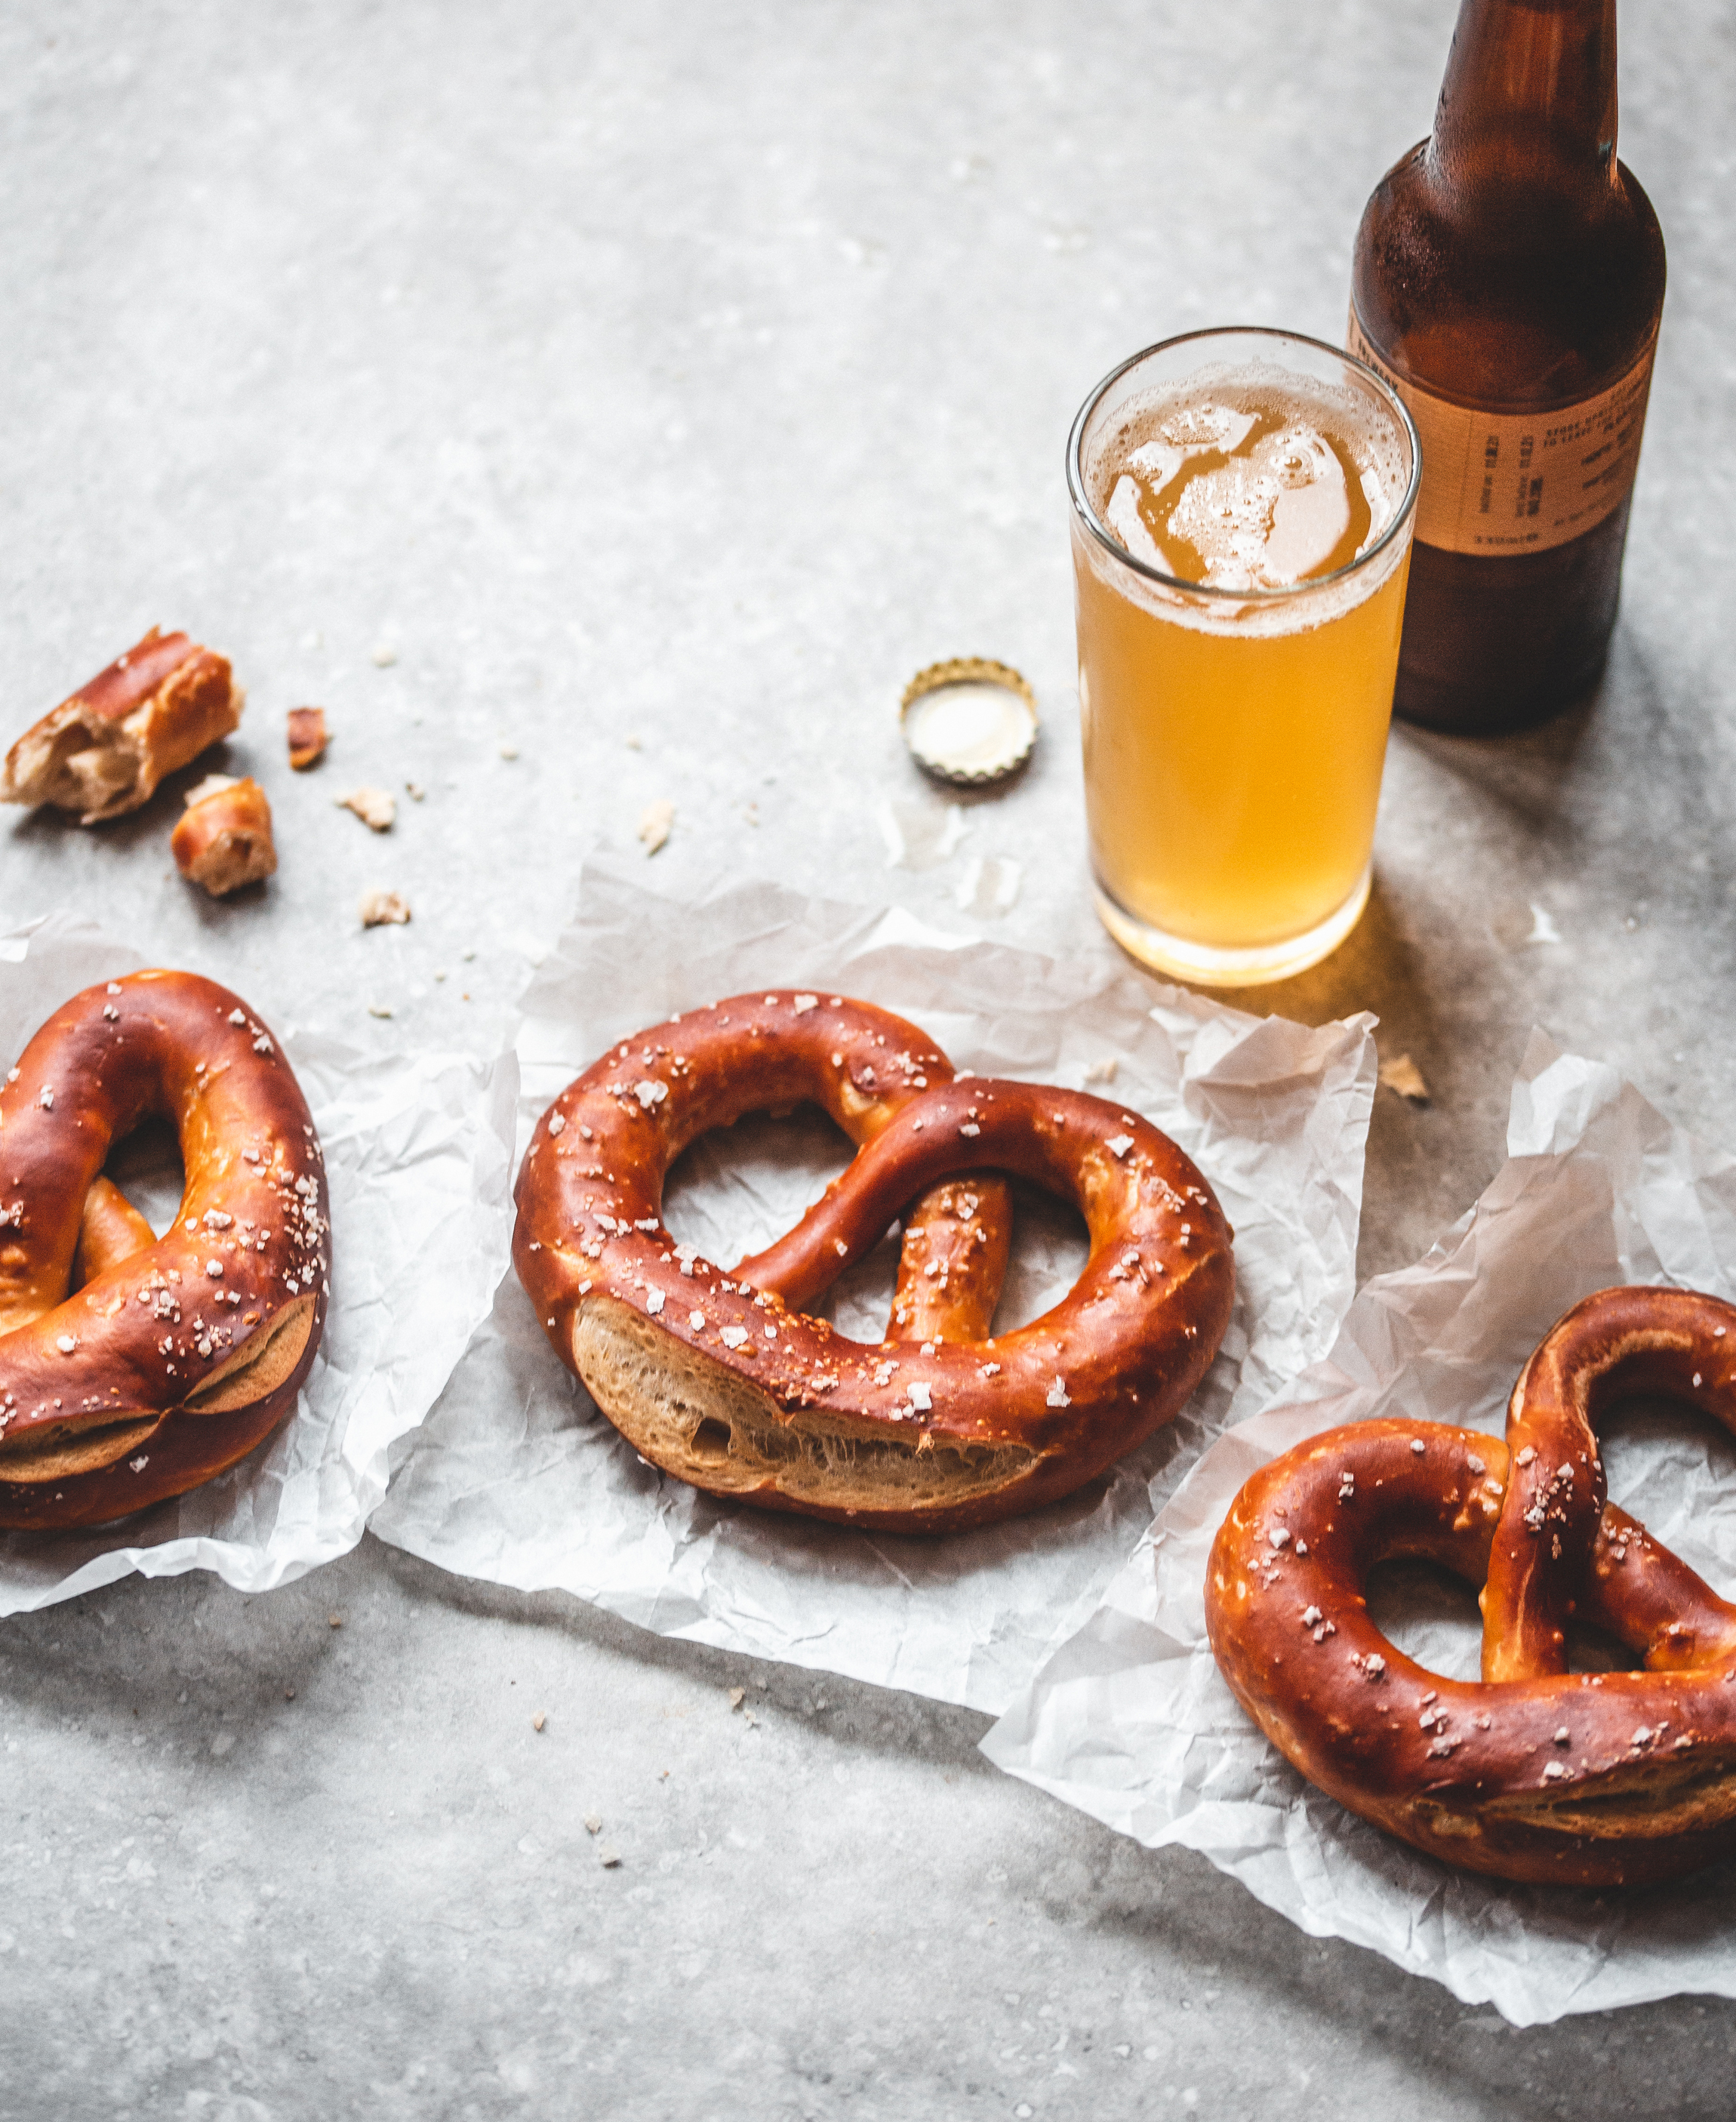 Classic pretzels recipe from Small Batch Bakes